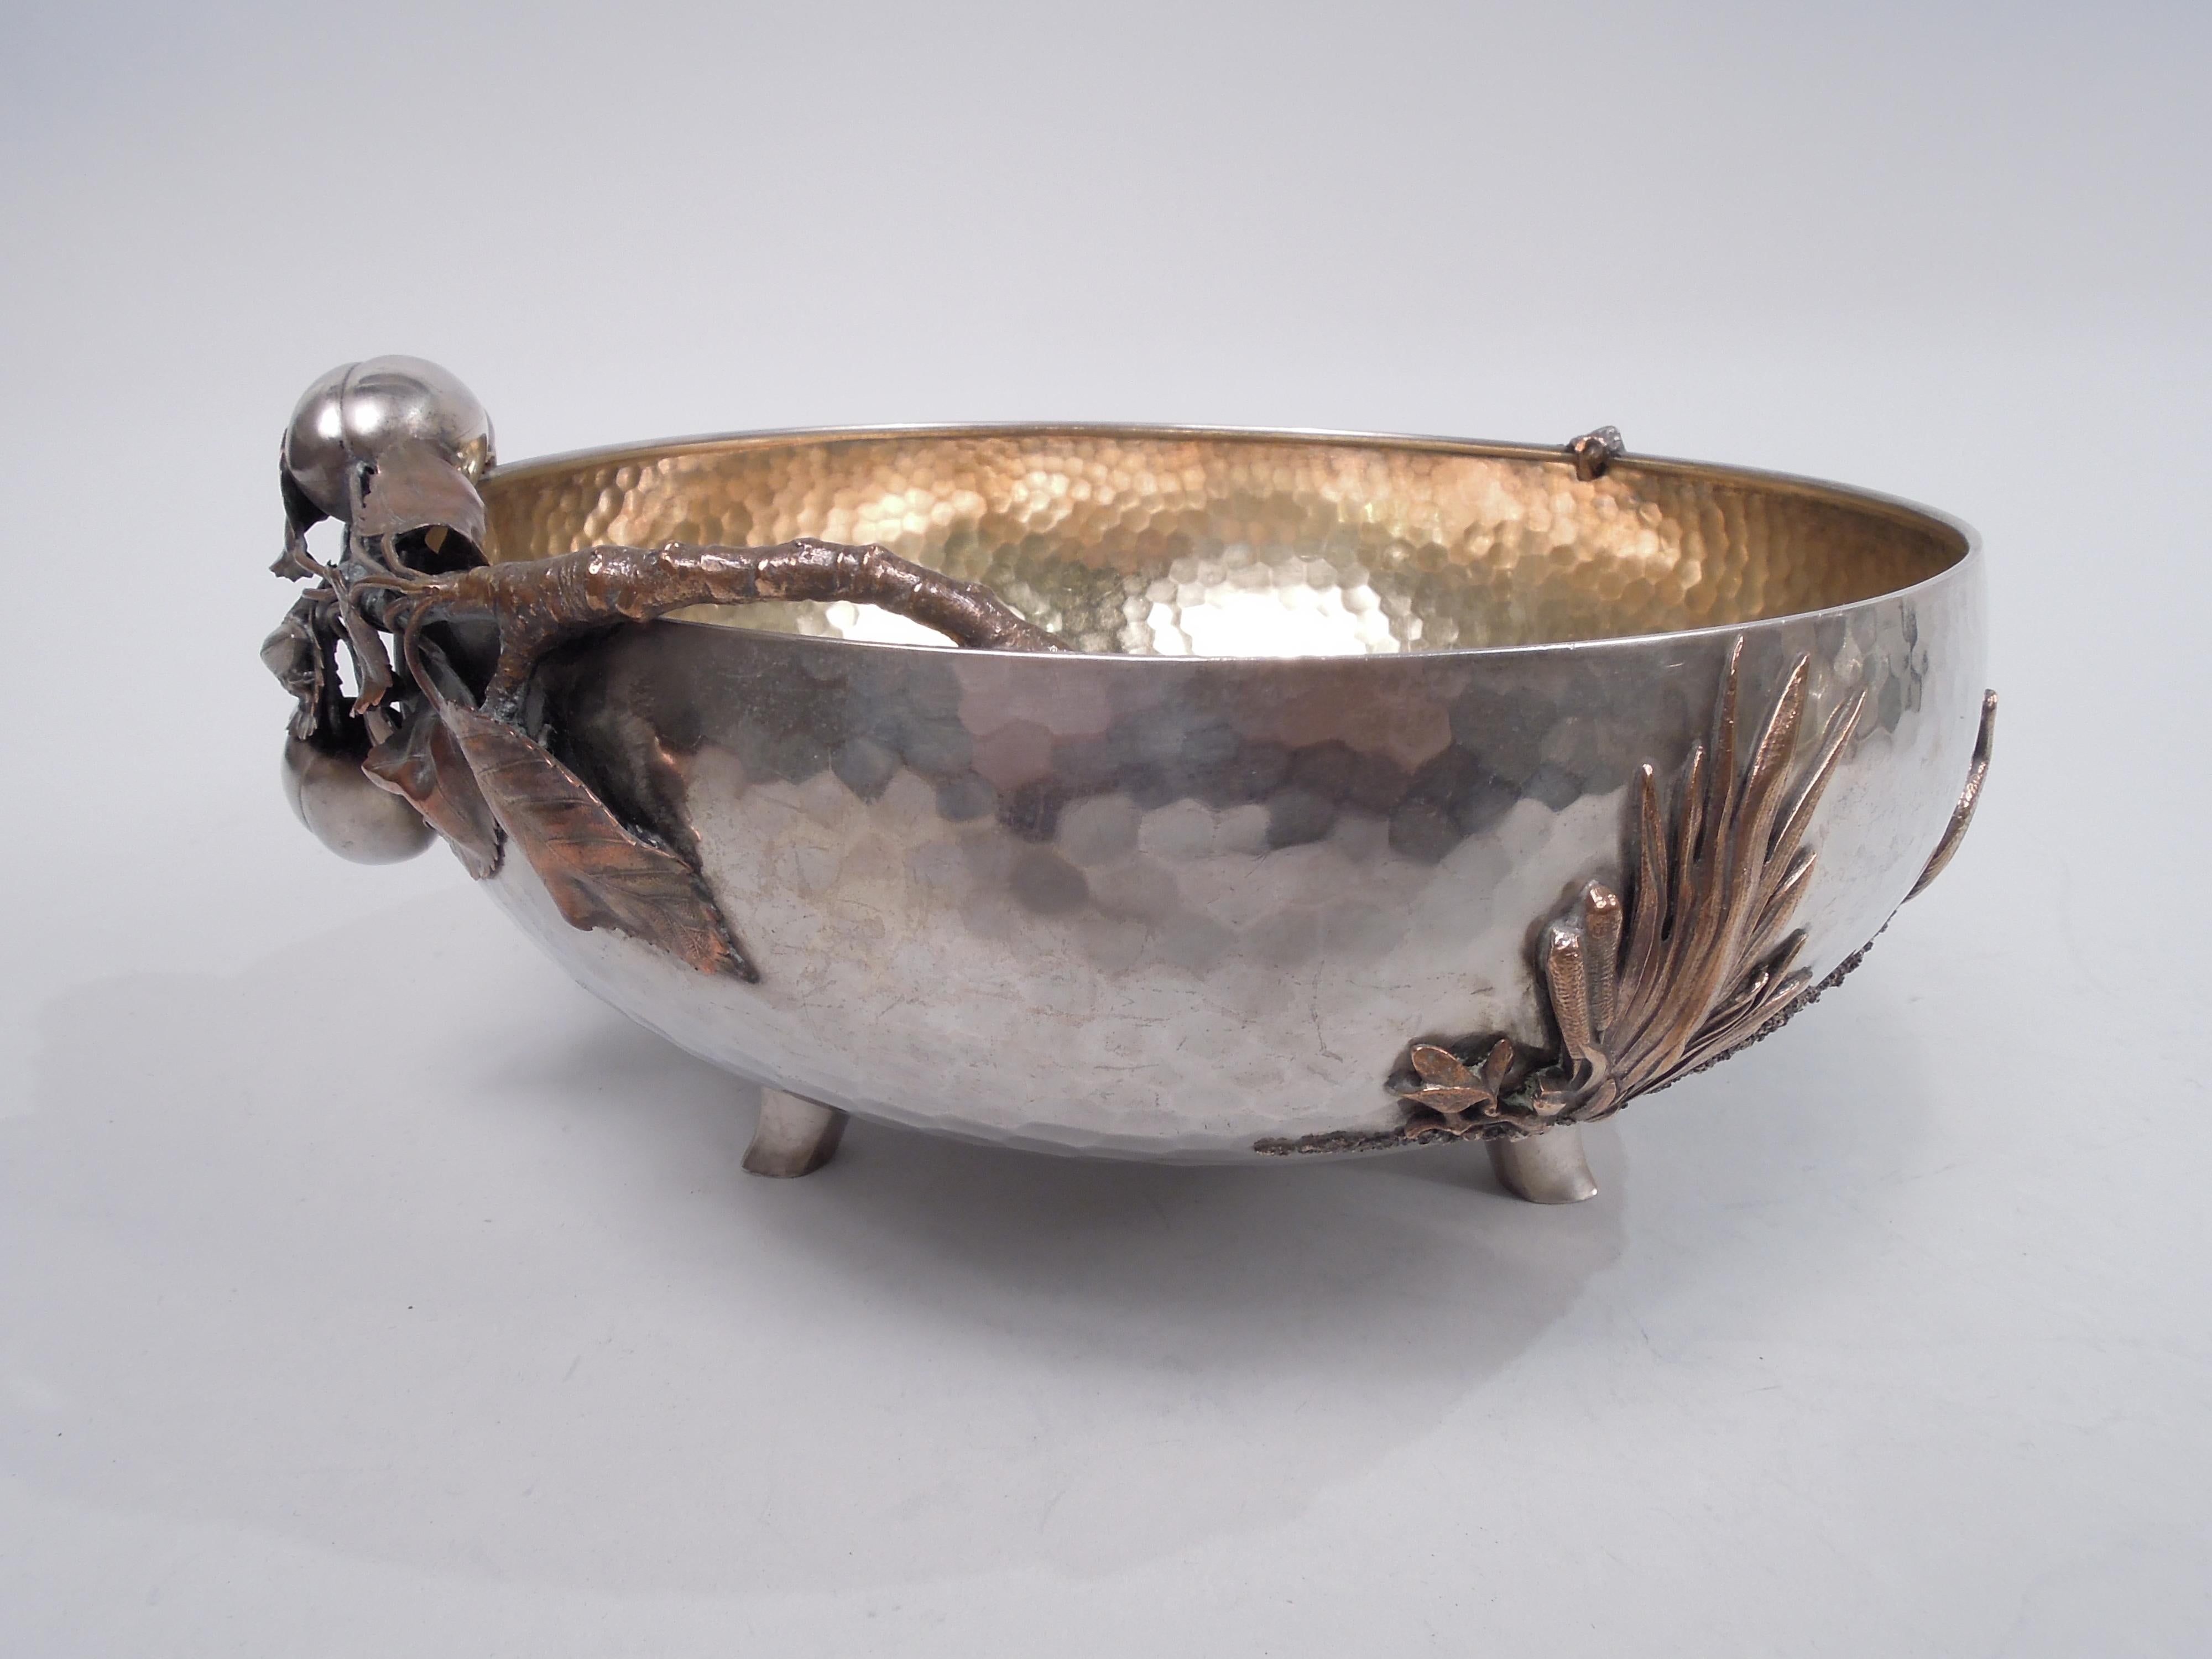 Gorham Japonesque Hand-Hammered Mixed Metal Dragonfly Bowl, 1883 In Good Condition For Sale In New York, NY